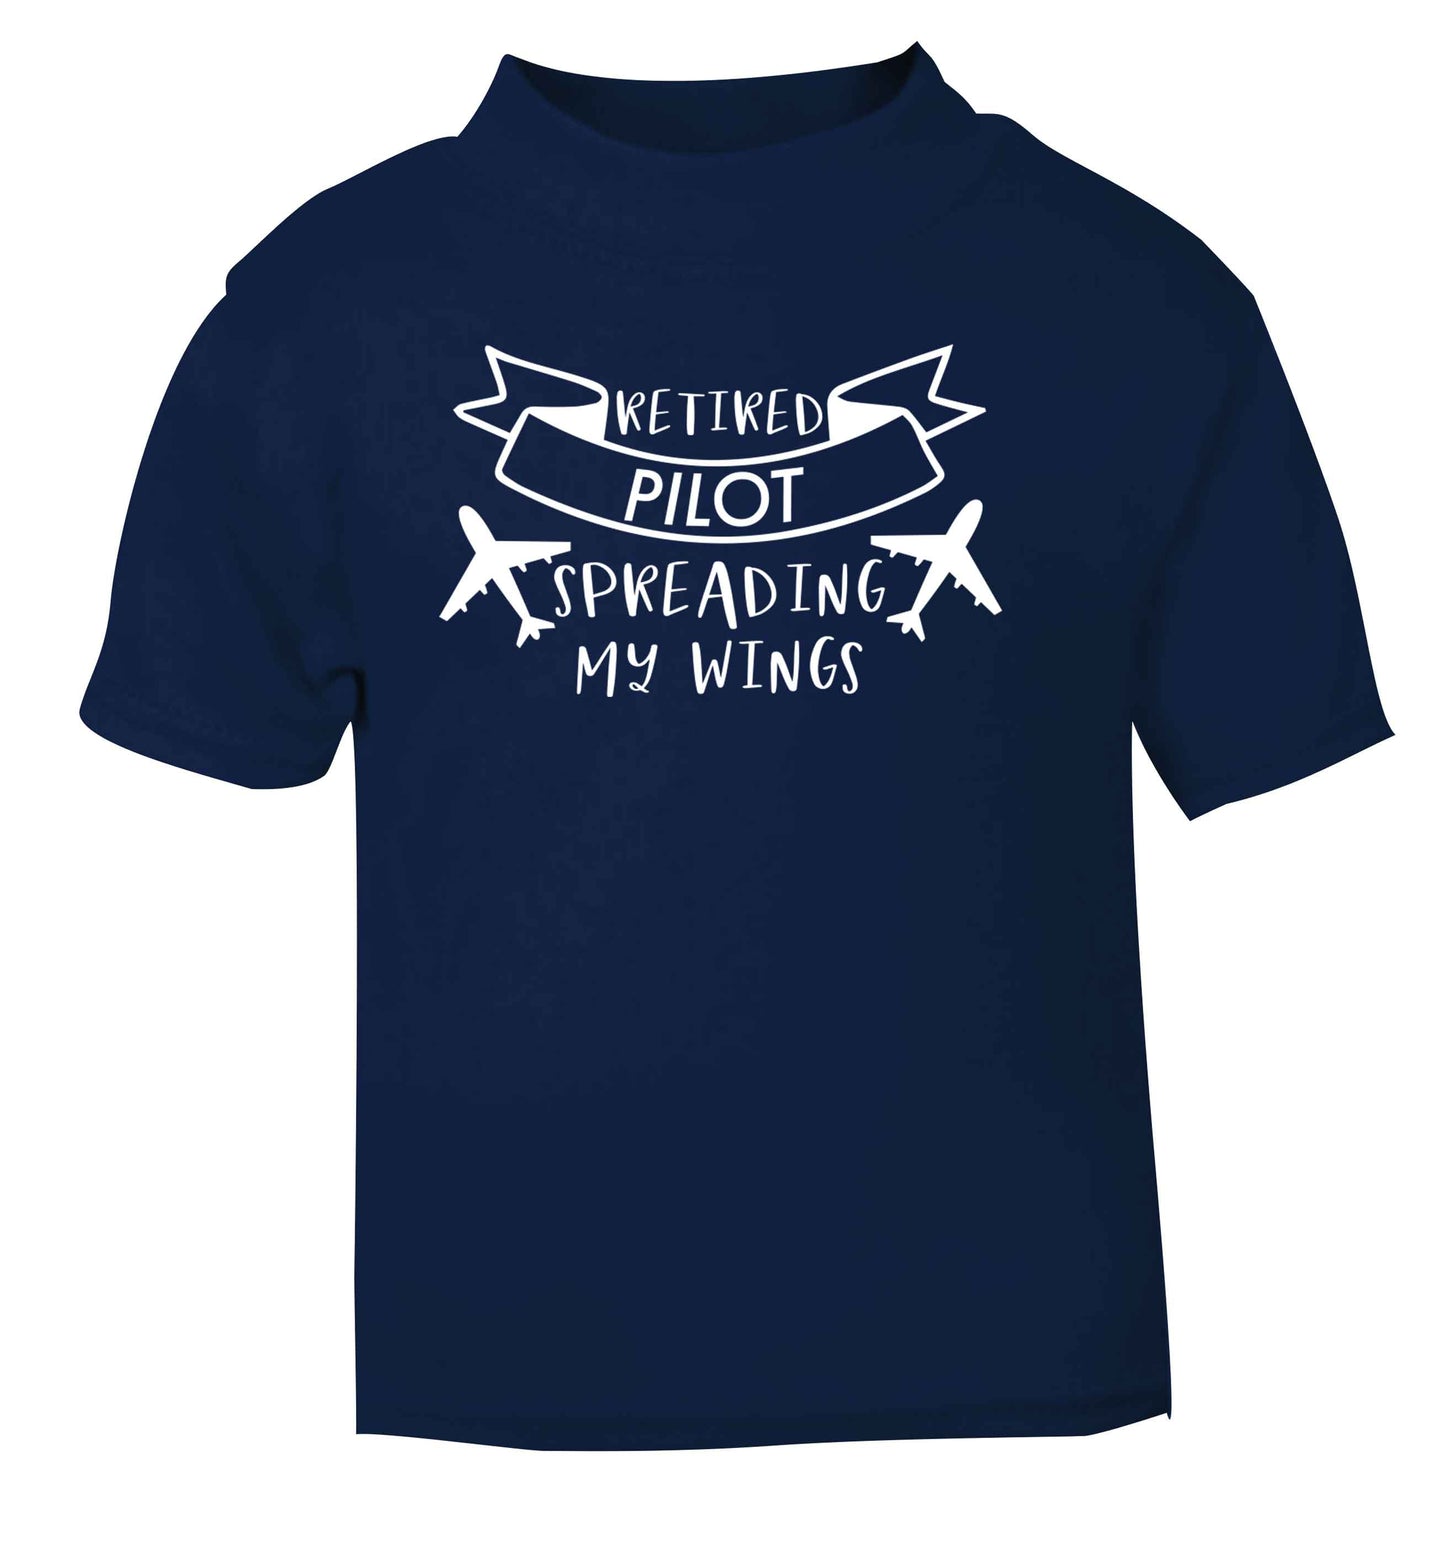 Retired pilot spreading my wings navy Baby Toddler Tshirt 2 Years